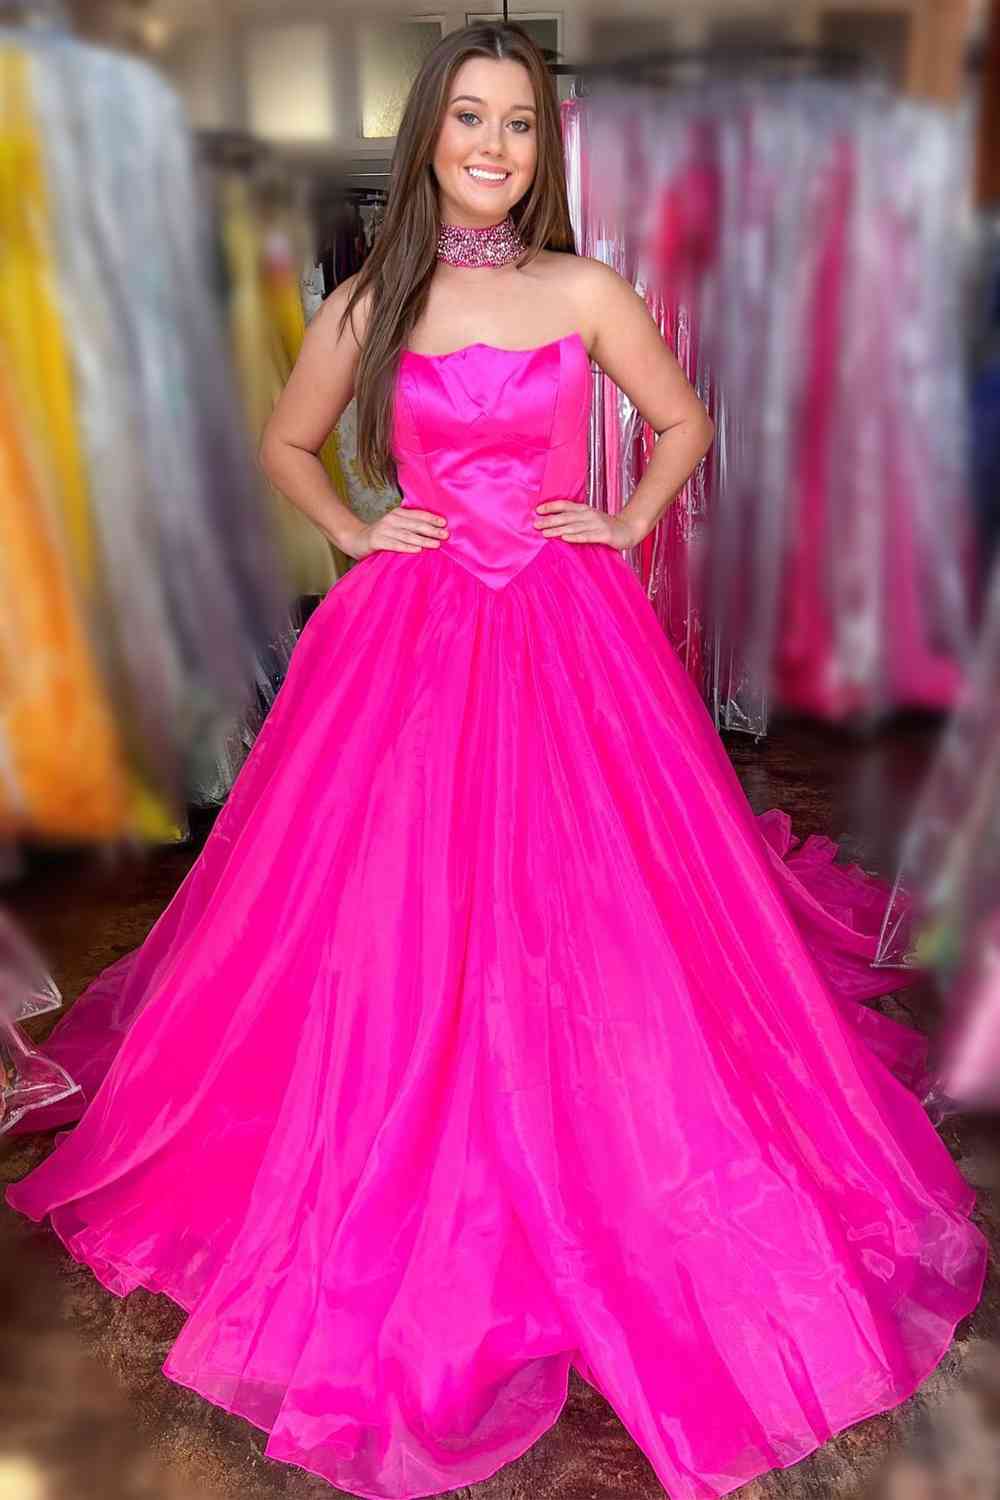 FancyVestido Princess Hot Pink Tiered Tulle Prom Dress US 12 / Photo Color / Full Length